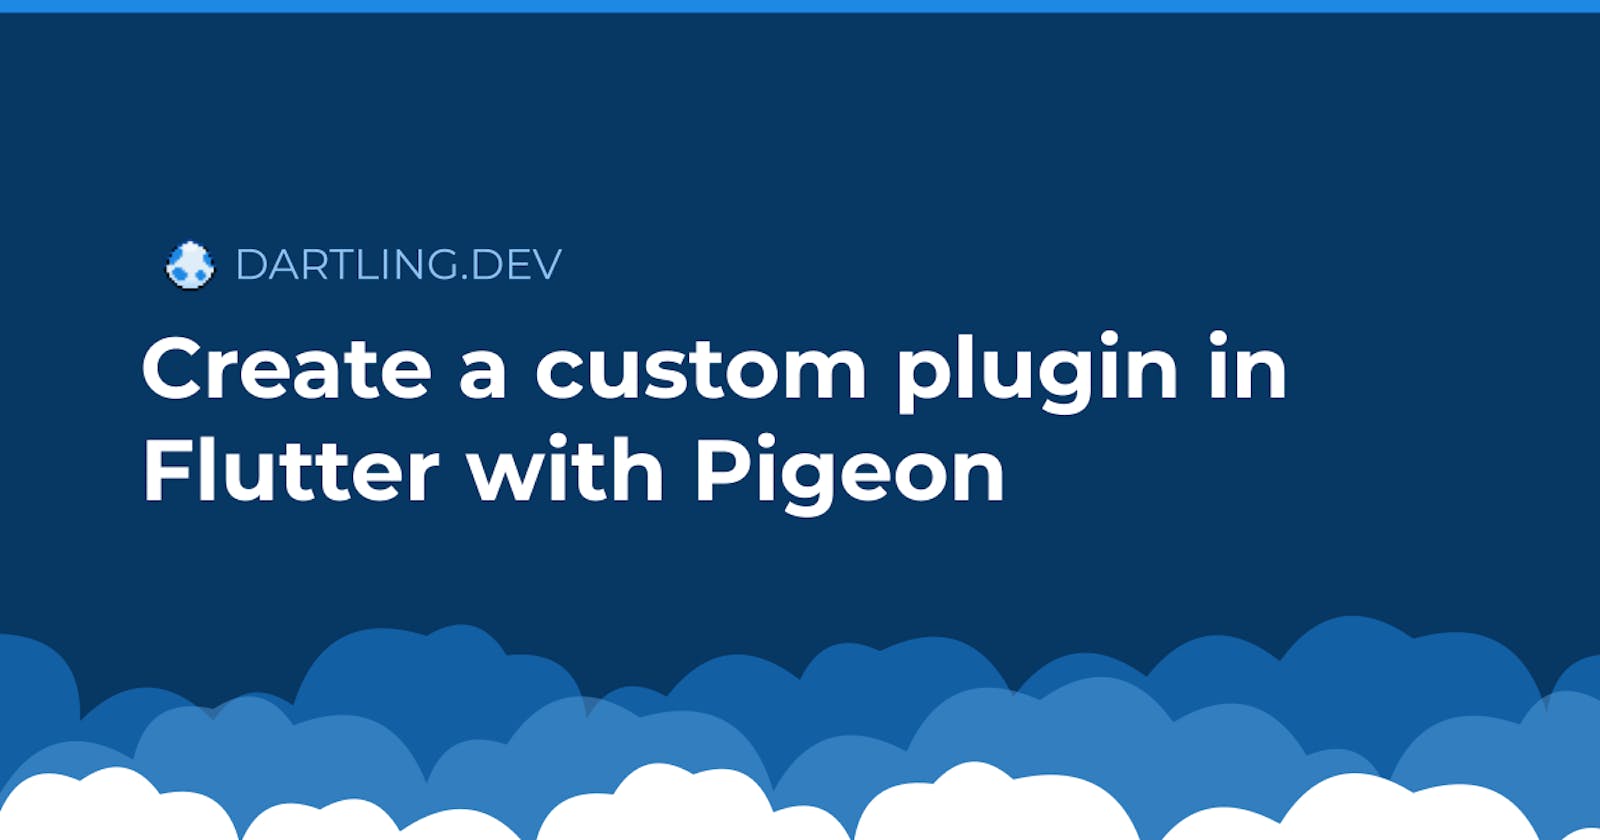 How to create a custom plugin in Flutter with Pigeon